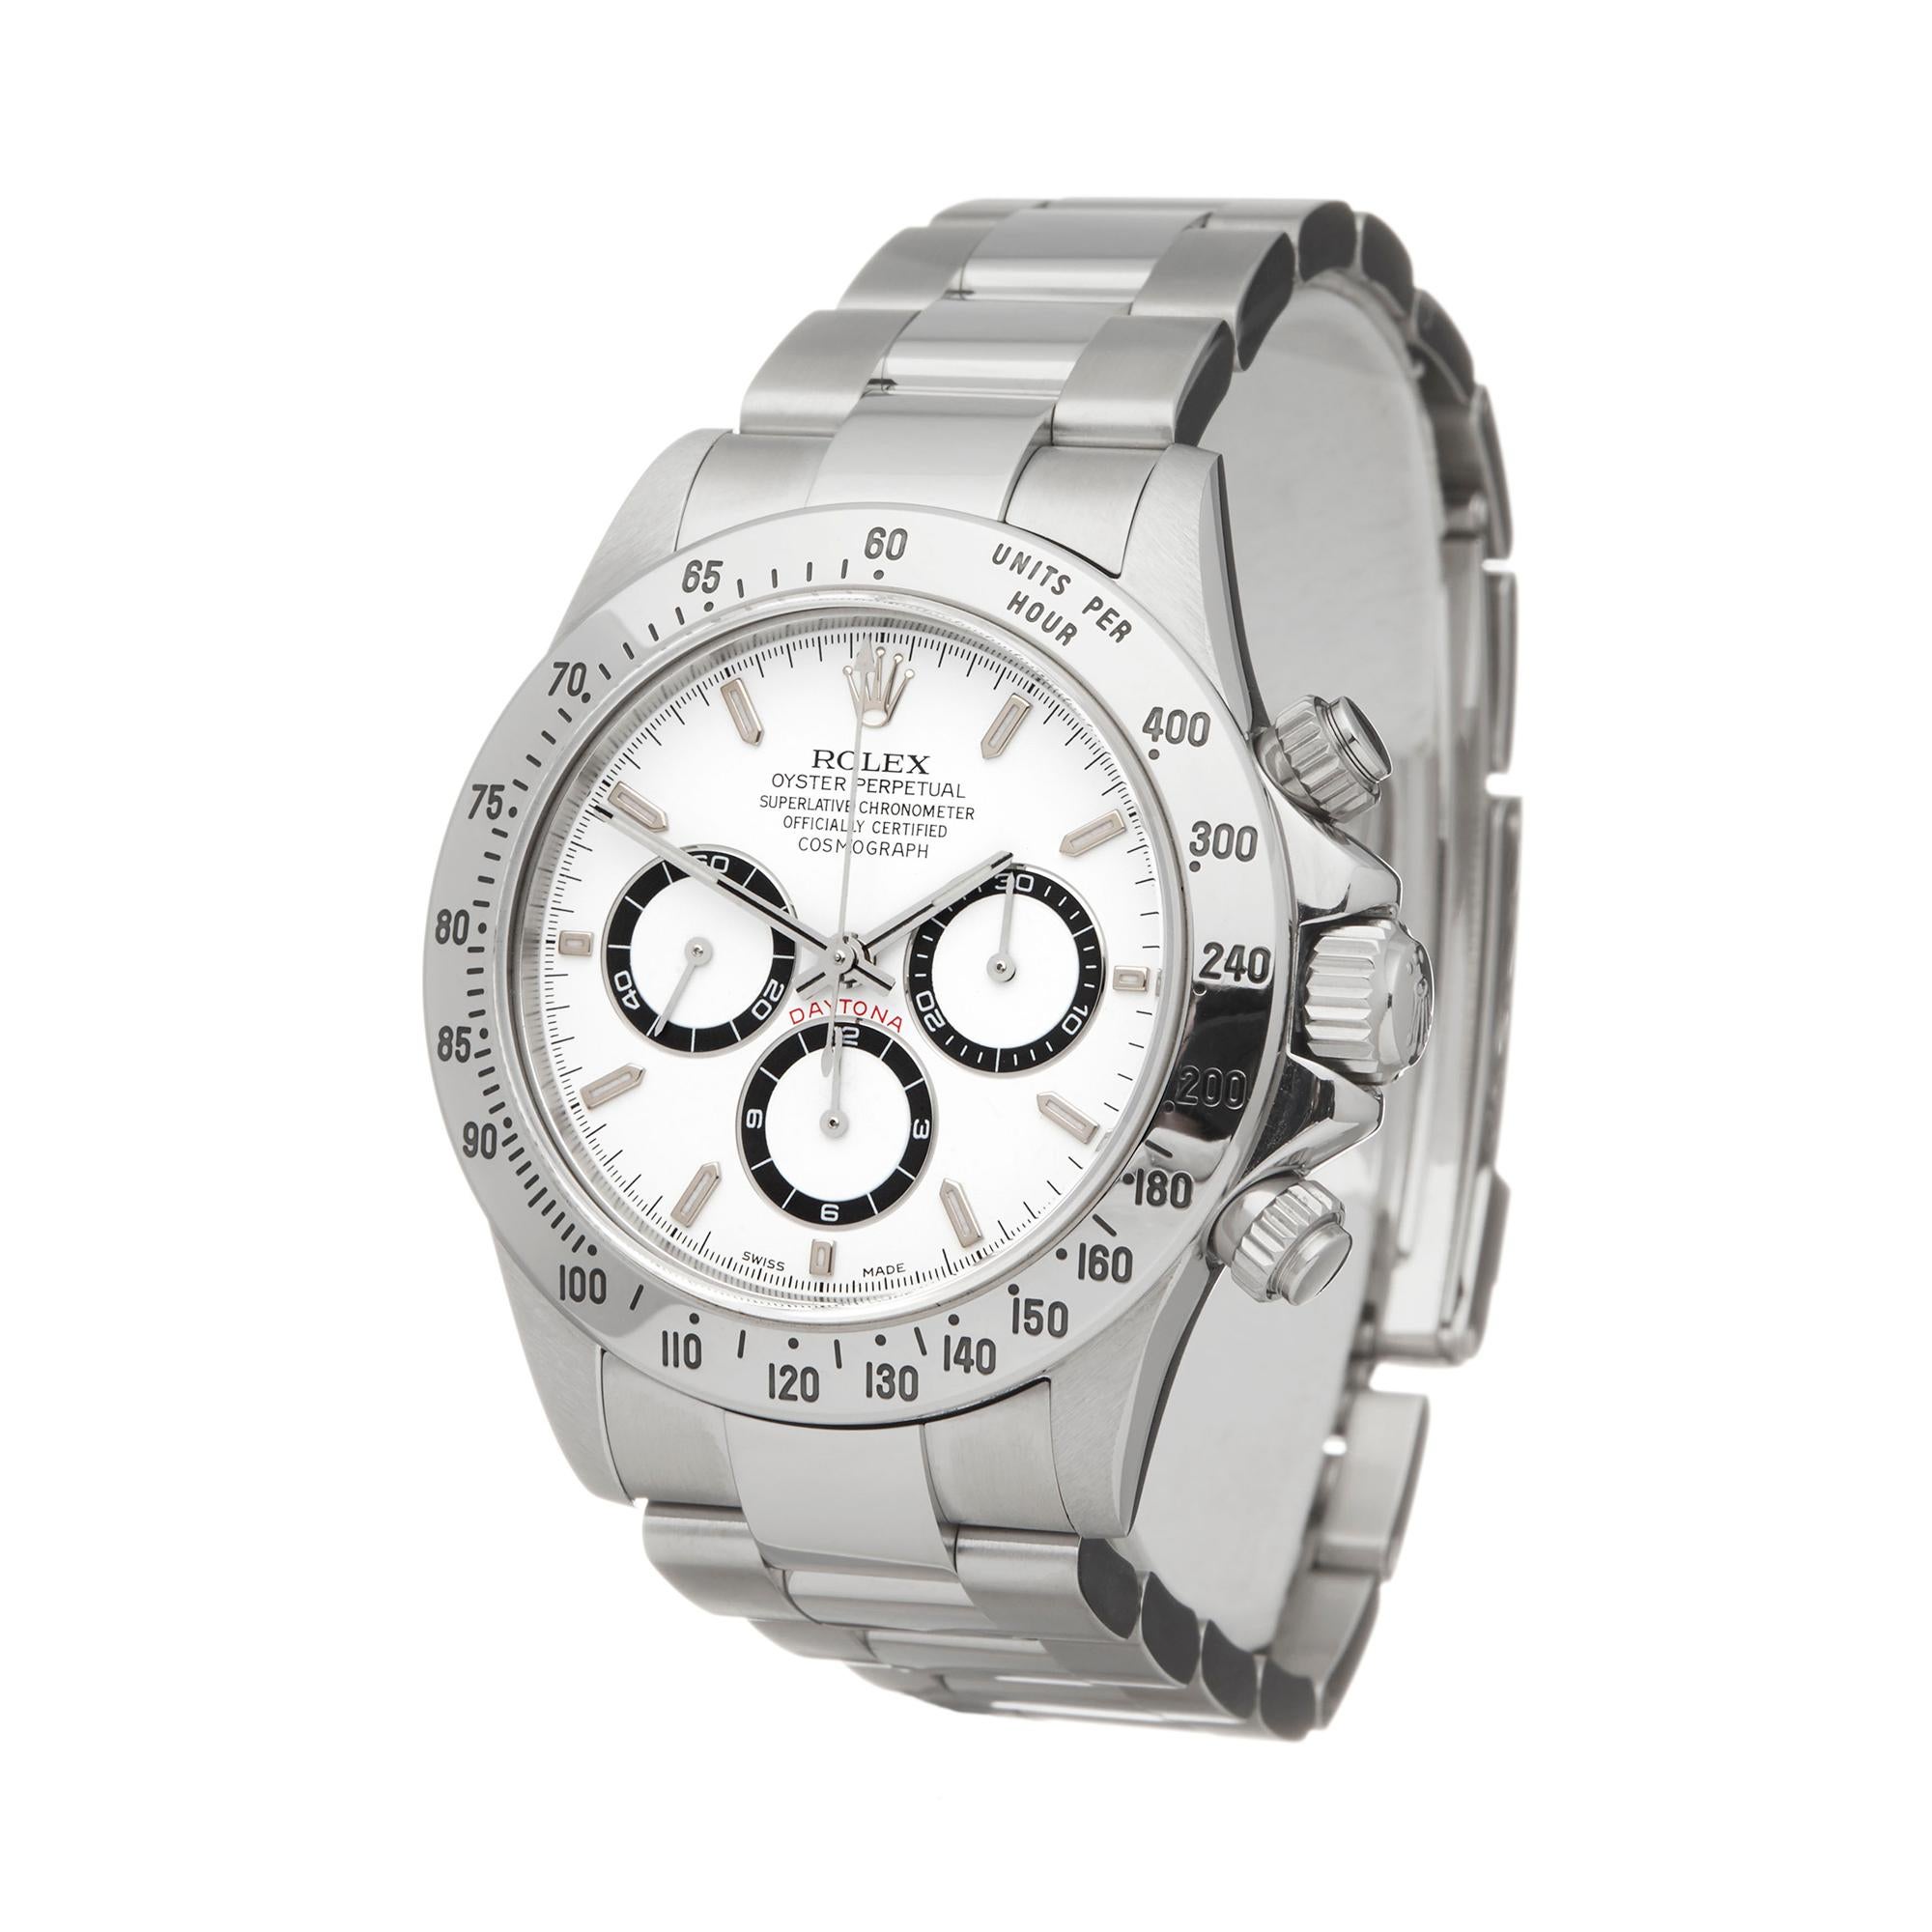 Reference: W6061
Manufacturer: Rolex
Model: Daytona
Model Reference: 16520
Age: 1st December 1999
Gender: Men's
Box and Papers: Box, Guarantee & Swing Tags
Dial: White Baton
Glass: Sapphire Crystal
Movement: Automatic
Water Resistance: To